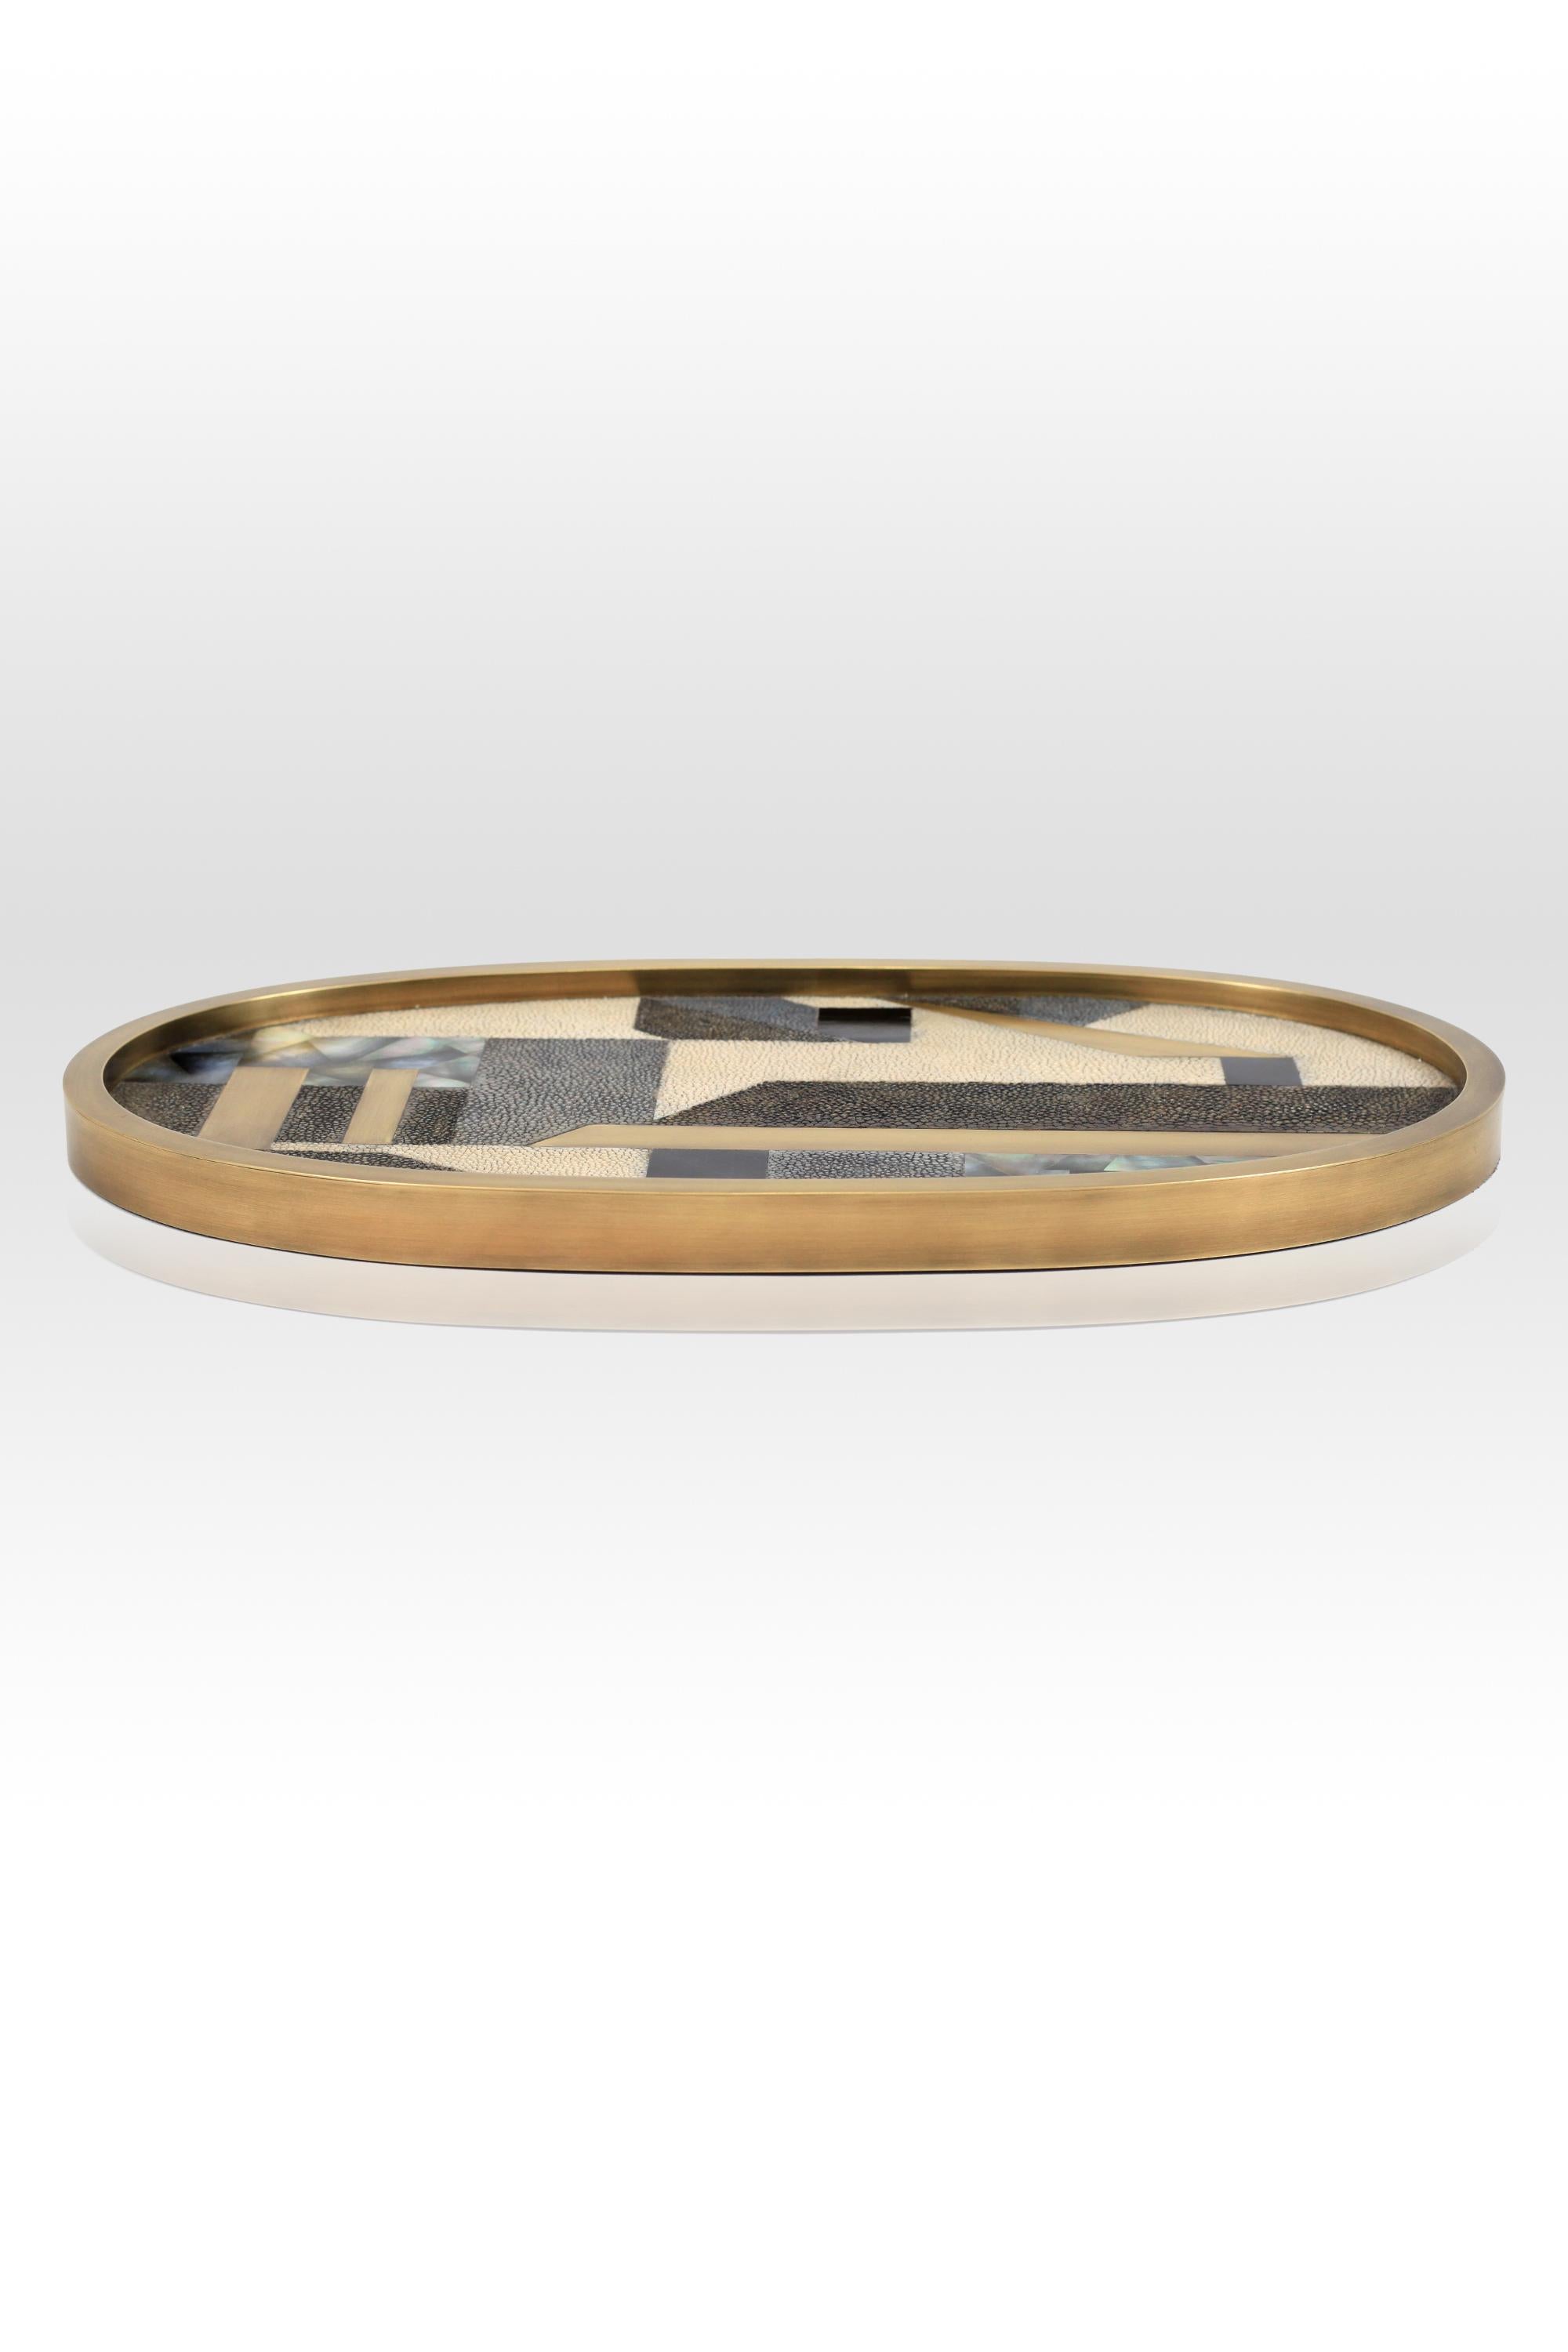 Oval Tray inlaid in Blue Shell and Brass by Kifu, Paris 10